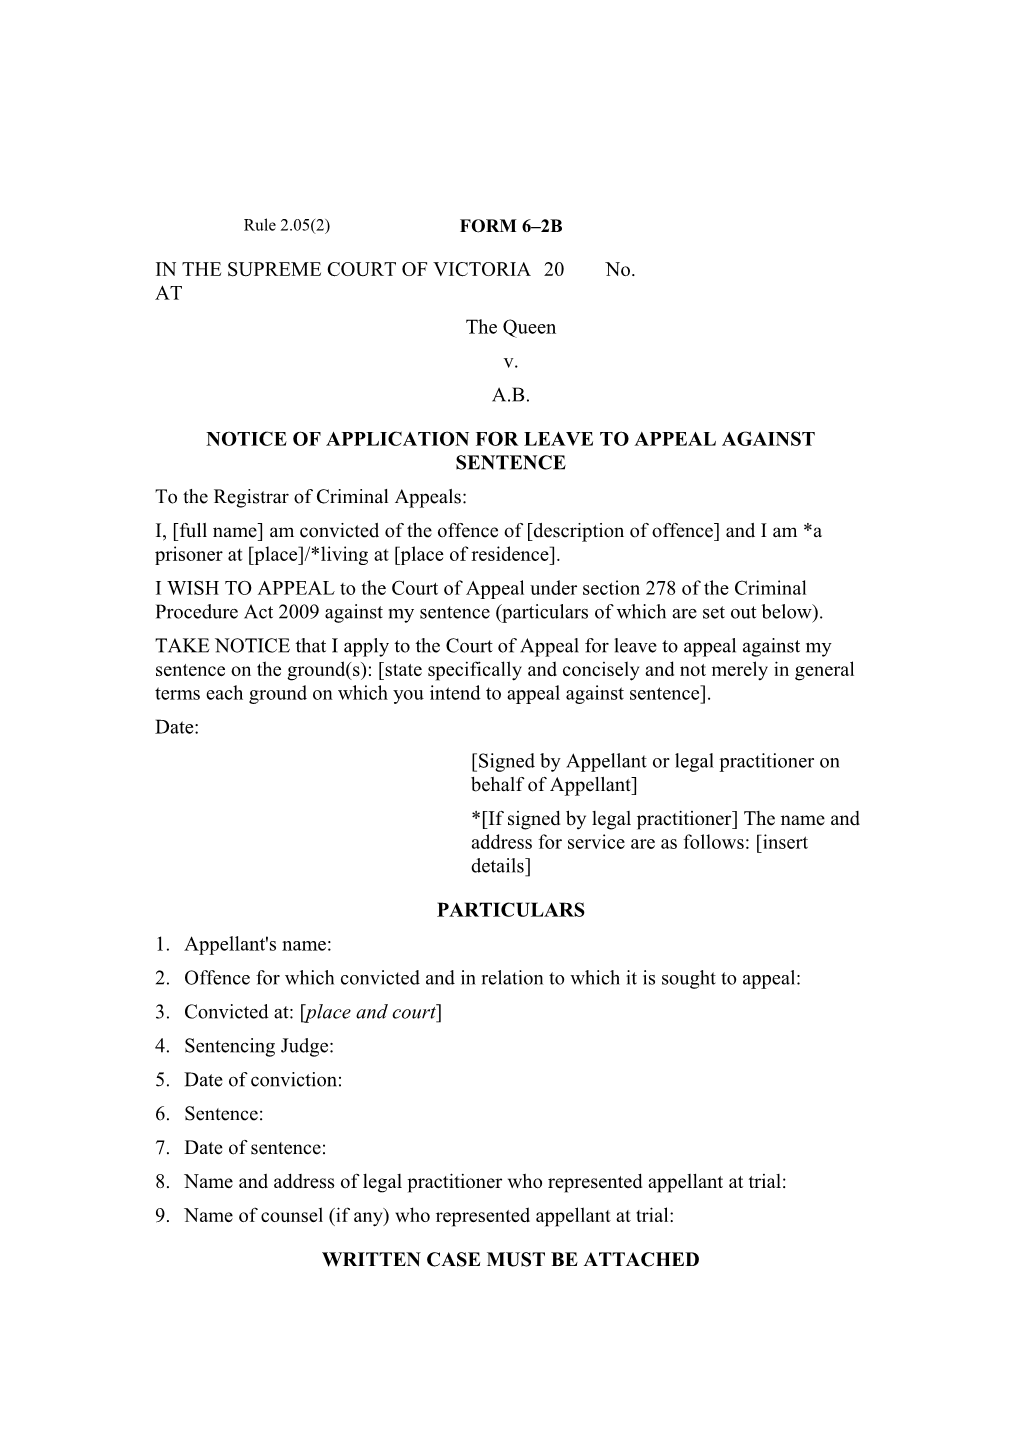 Notice of Application for Leave to Appeal Against Sentence